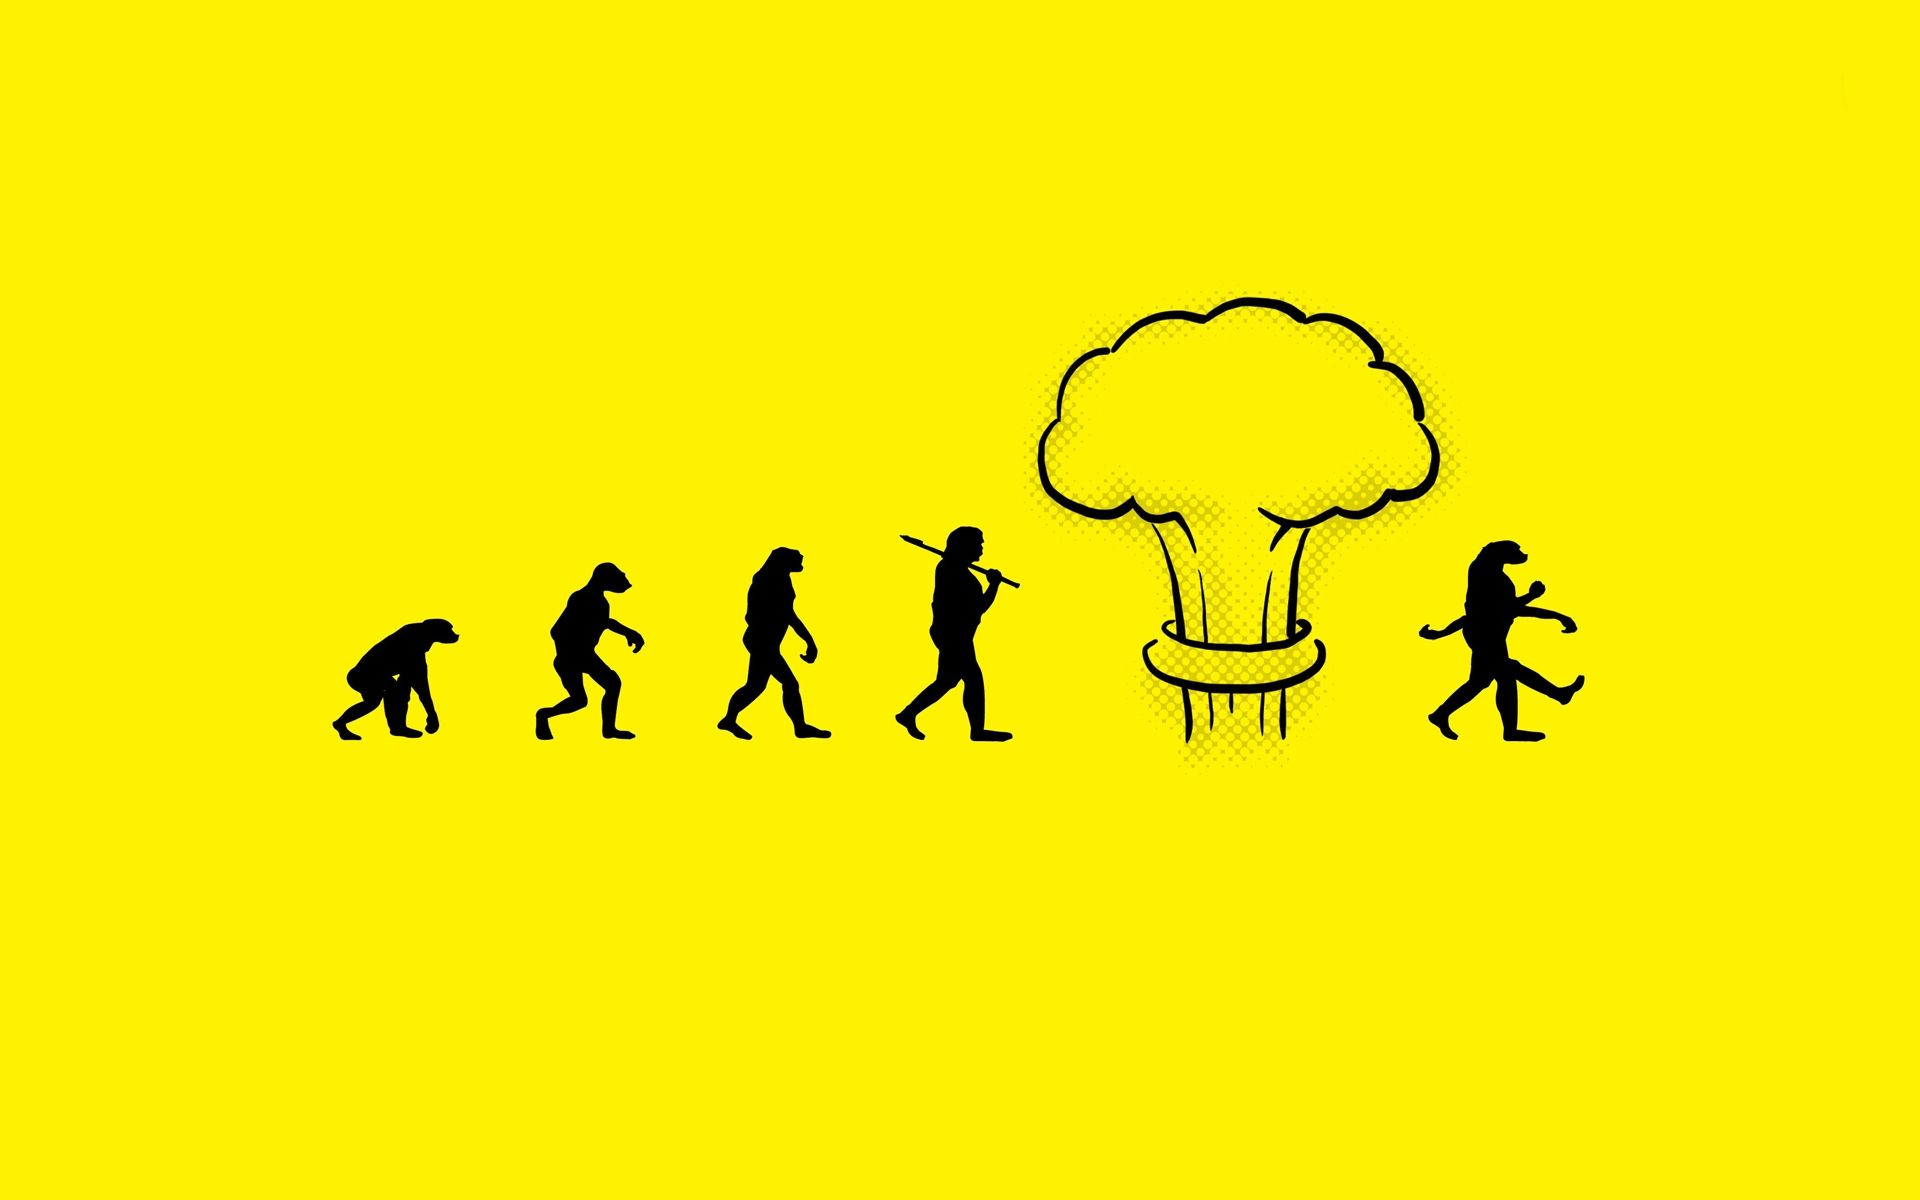 Strange Evolution wallpapers and images - wallpapers, pictures, photos